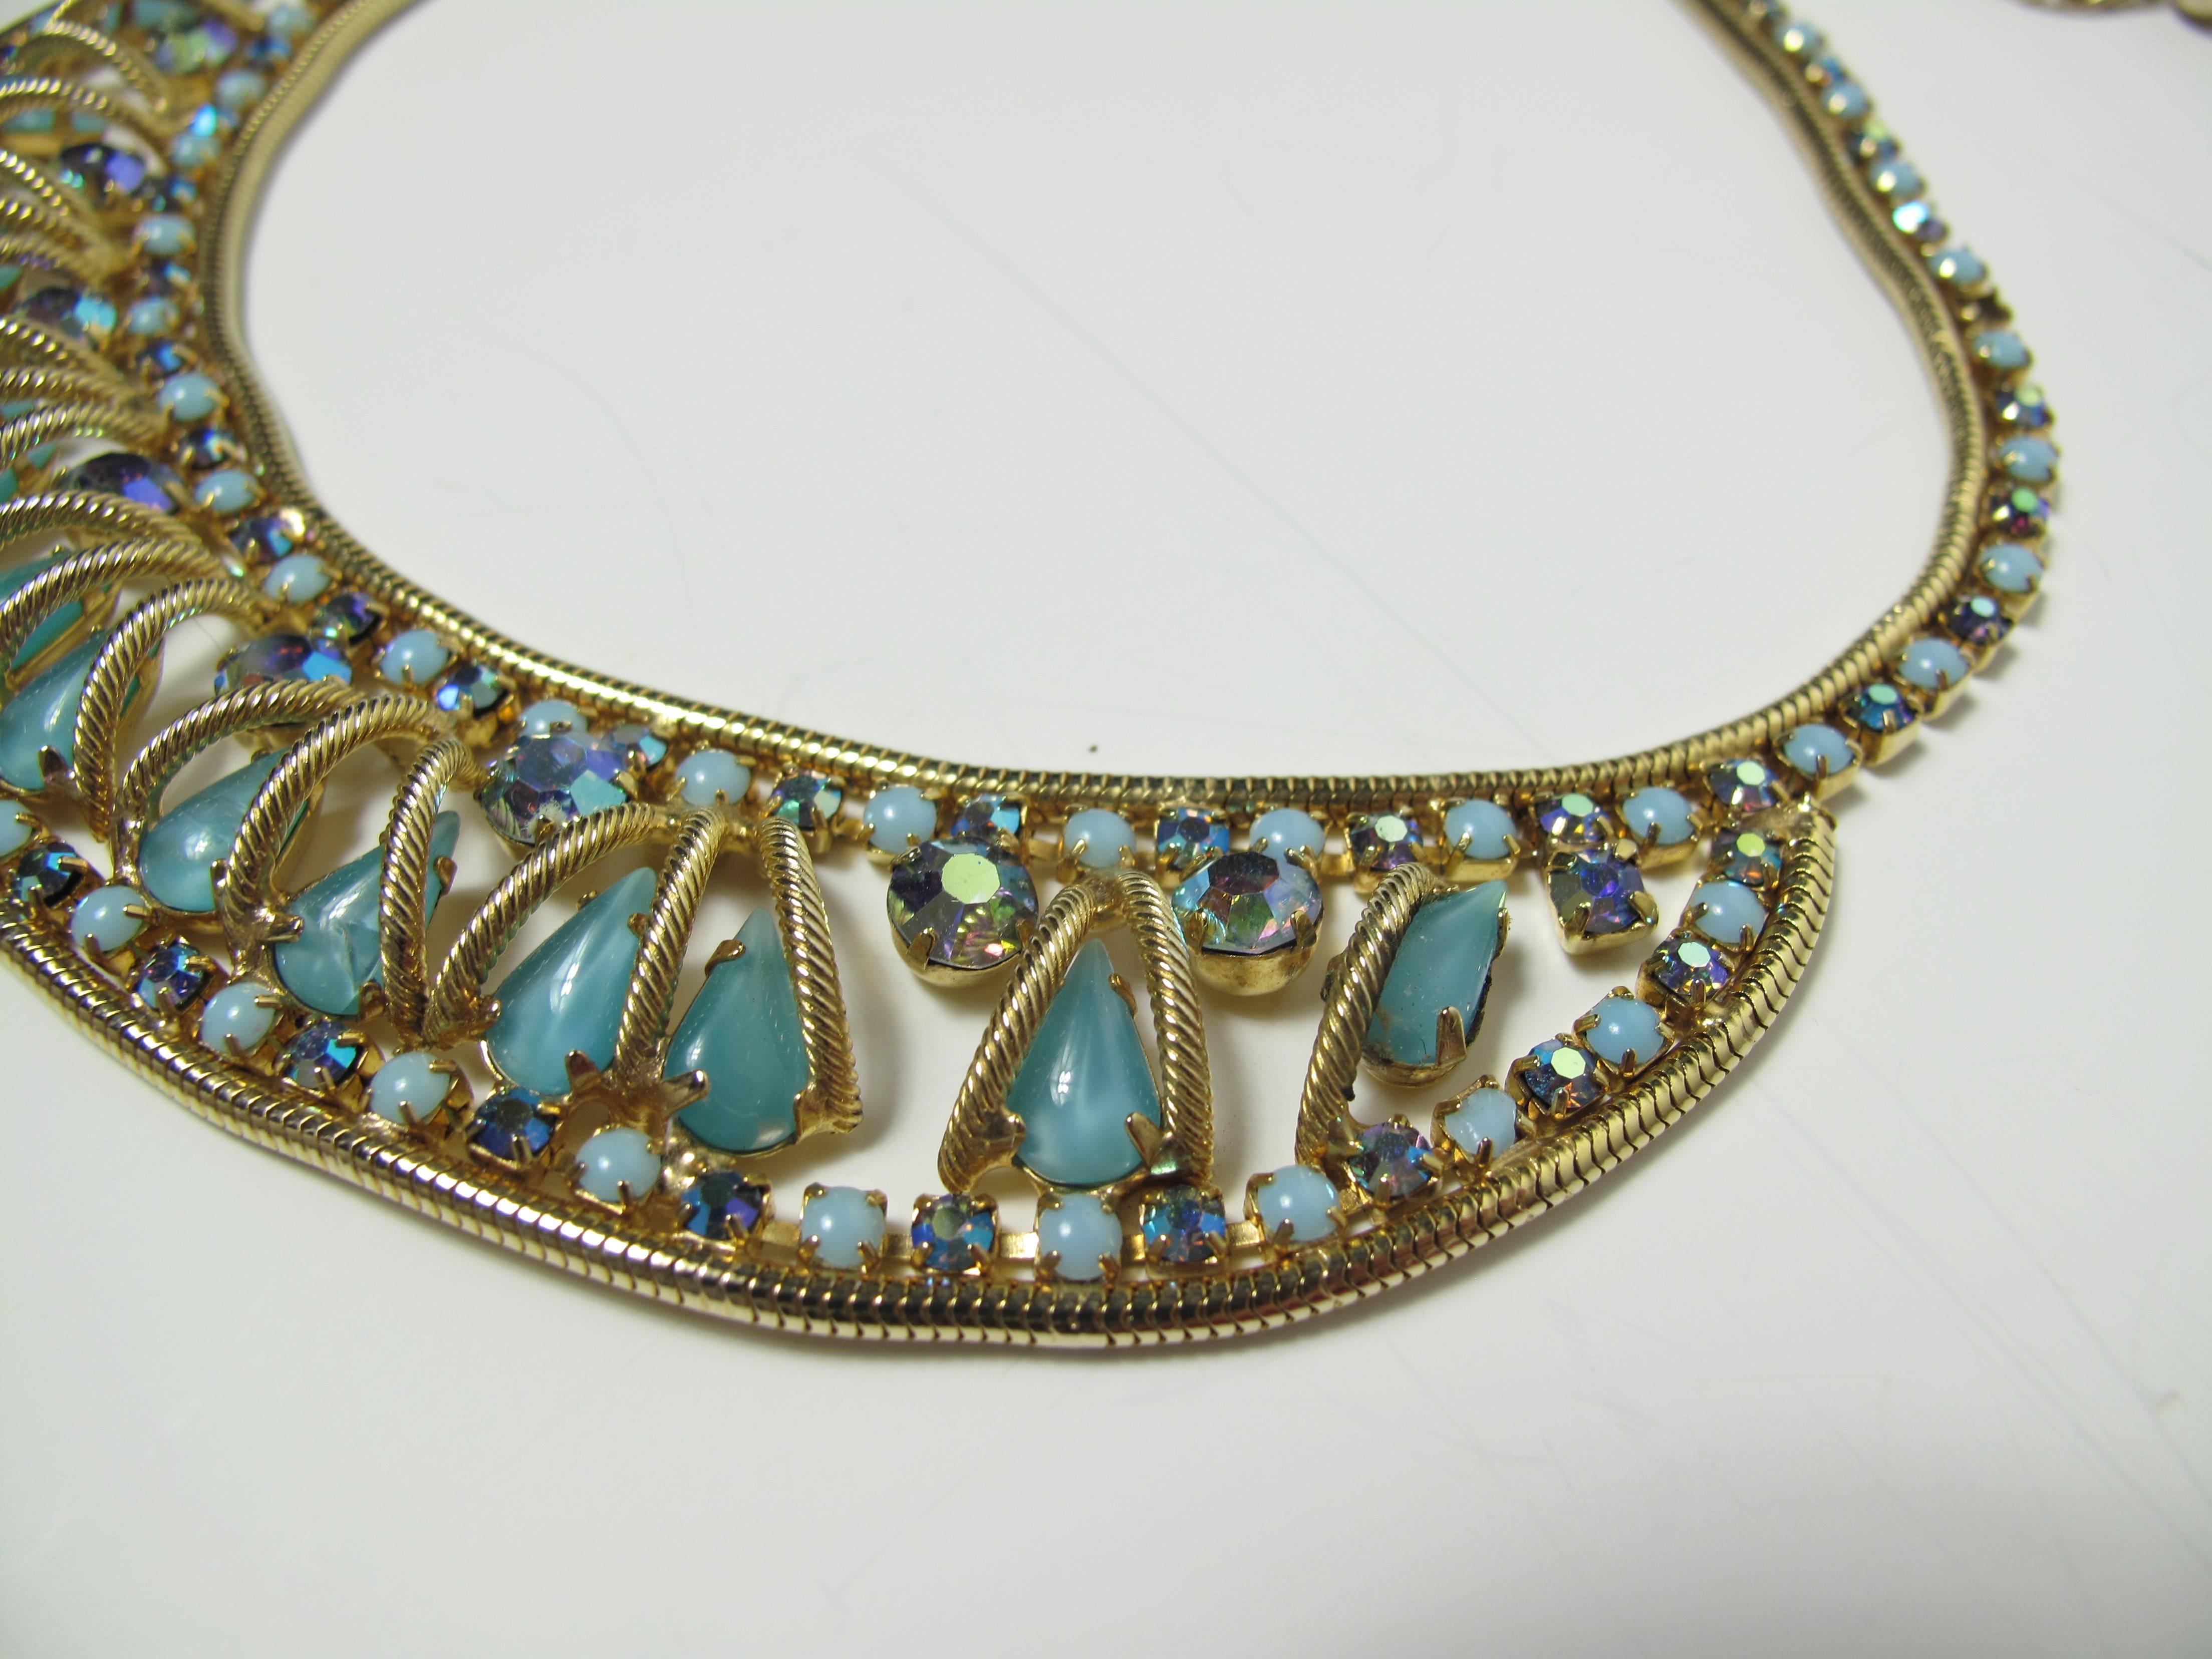 1950s goldtone snake chain and blue rhinestones choker and clip on earrings set. Condition: Excellent.

We accept returns for refund, please see our terms.  We offer Free Ground Shipping within the US.  Please let us know if you have any questions. 
